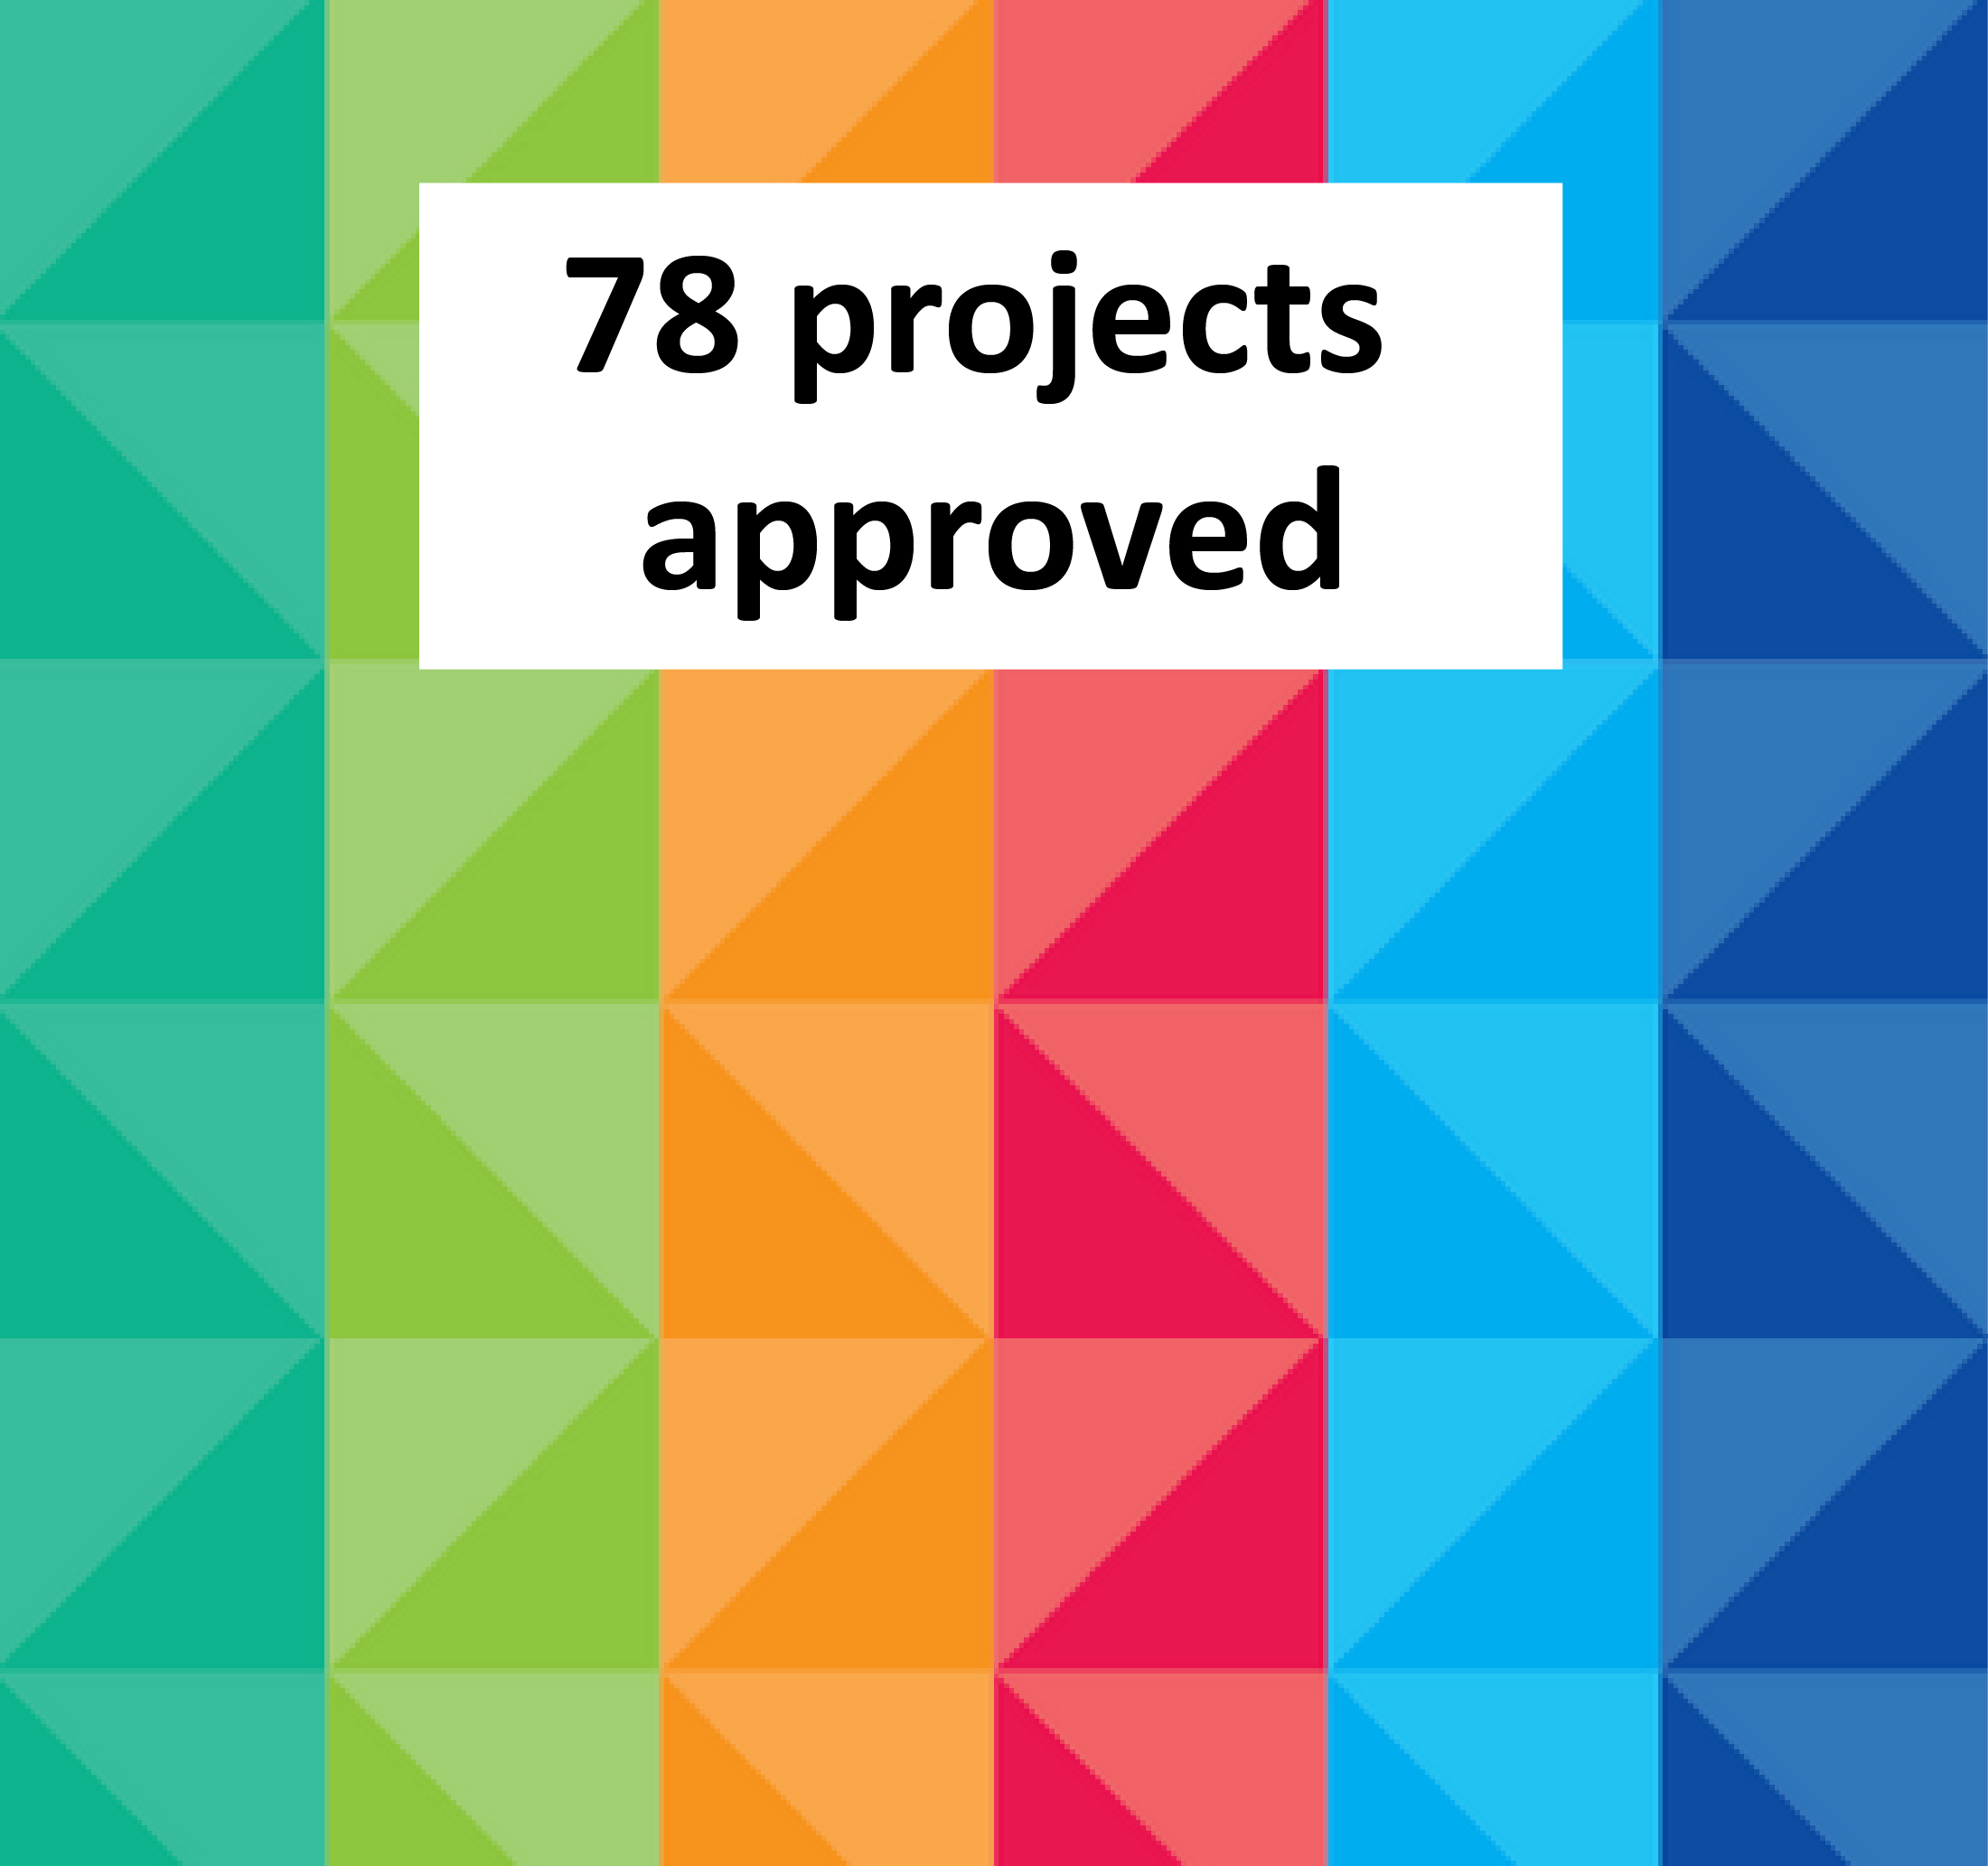 We are happy to announce that the project UrbCitizenPower has been approved within the second call of the Interreg Europe Programme. REM-Consult has successfully supported the lead partner – the Heinrich Böll Foundation Schleswig-Holstein – in the project development and application process under priority 5 